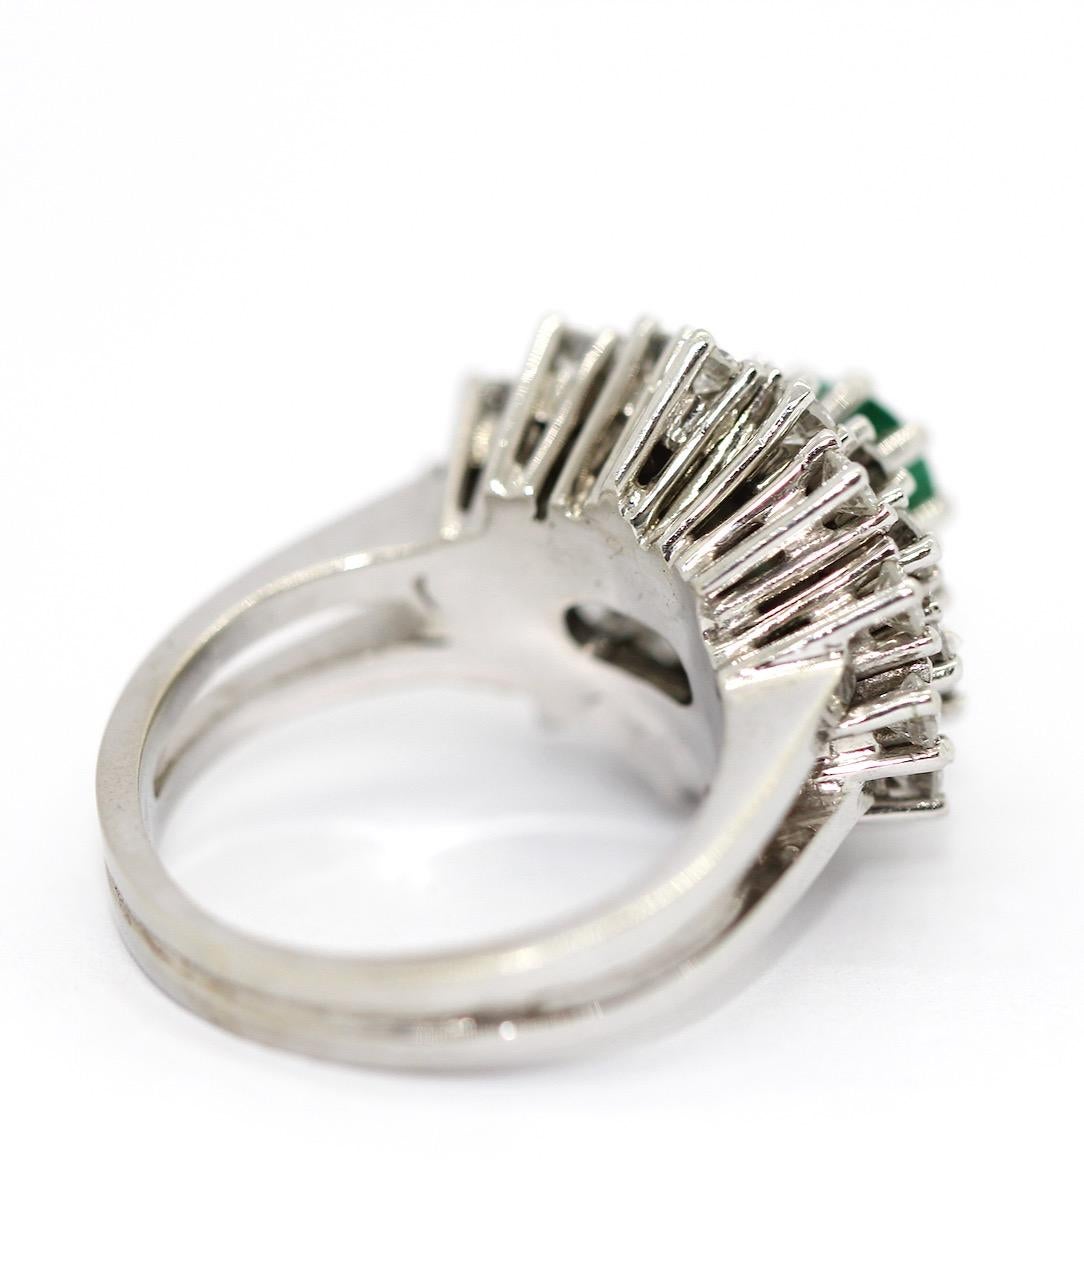 Women's White Gold Ring Set with White Diamonds and Emerald, 14 Karat For Sale